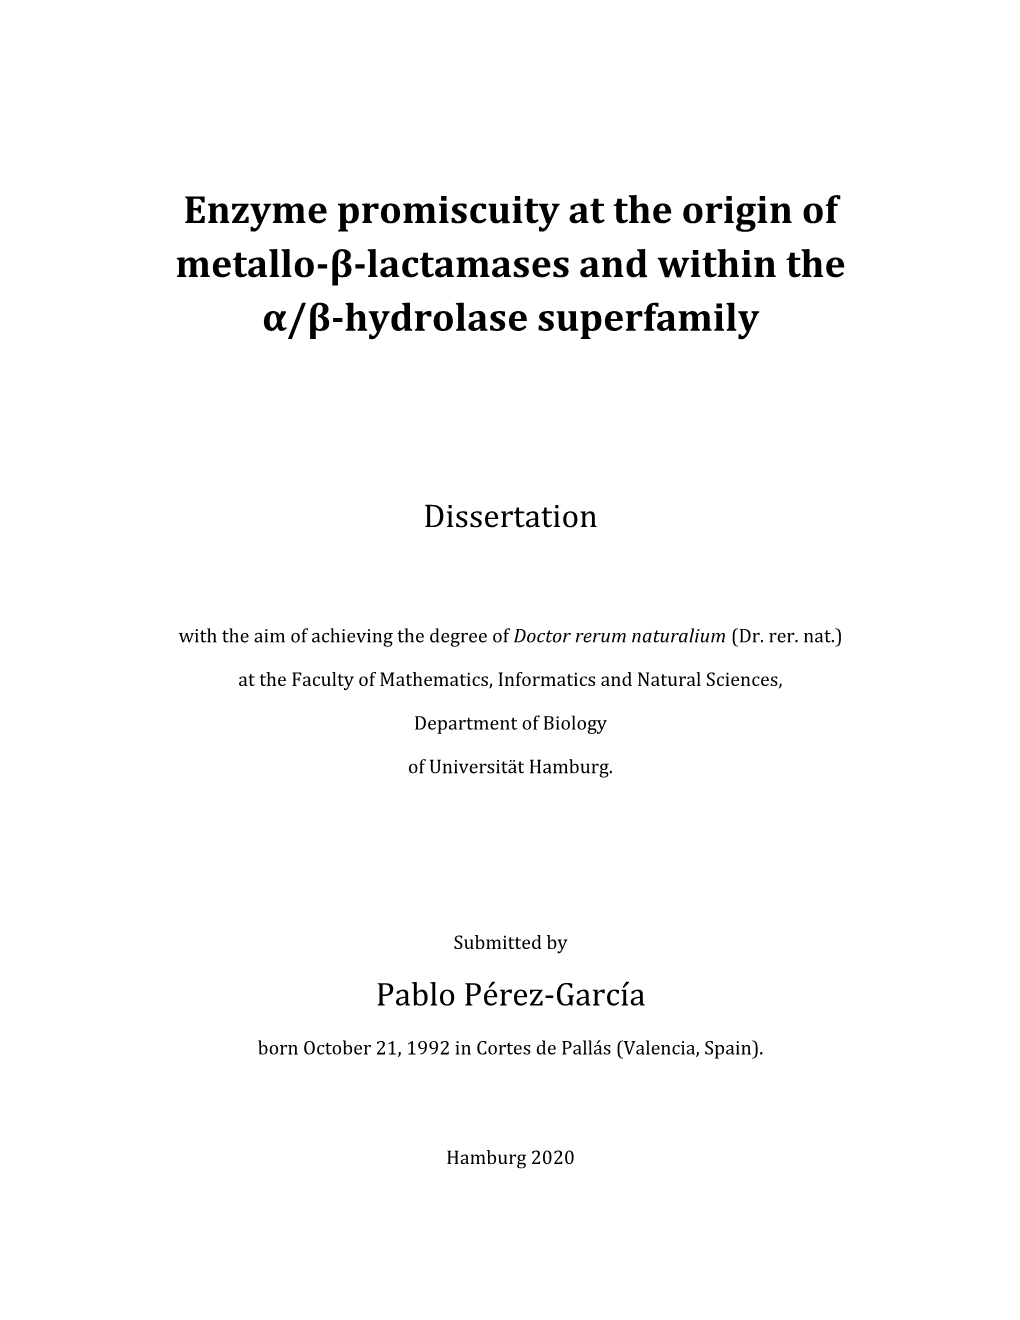 Enzyme Promiscuity at the Origin of Metallo-Β-Lactamases and Within the Α/Β-Hydrolase Superfamily